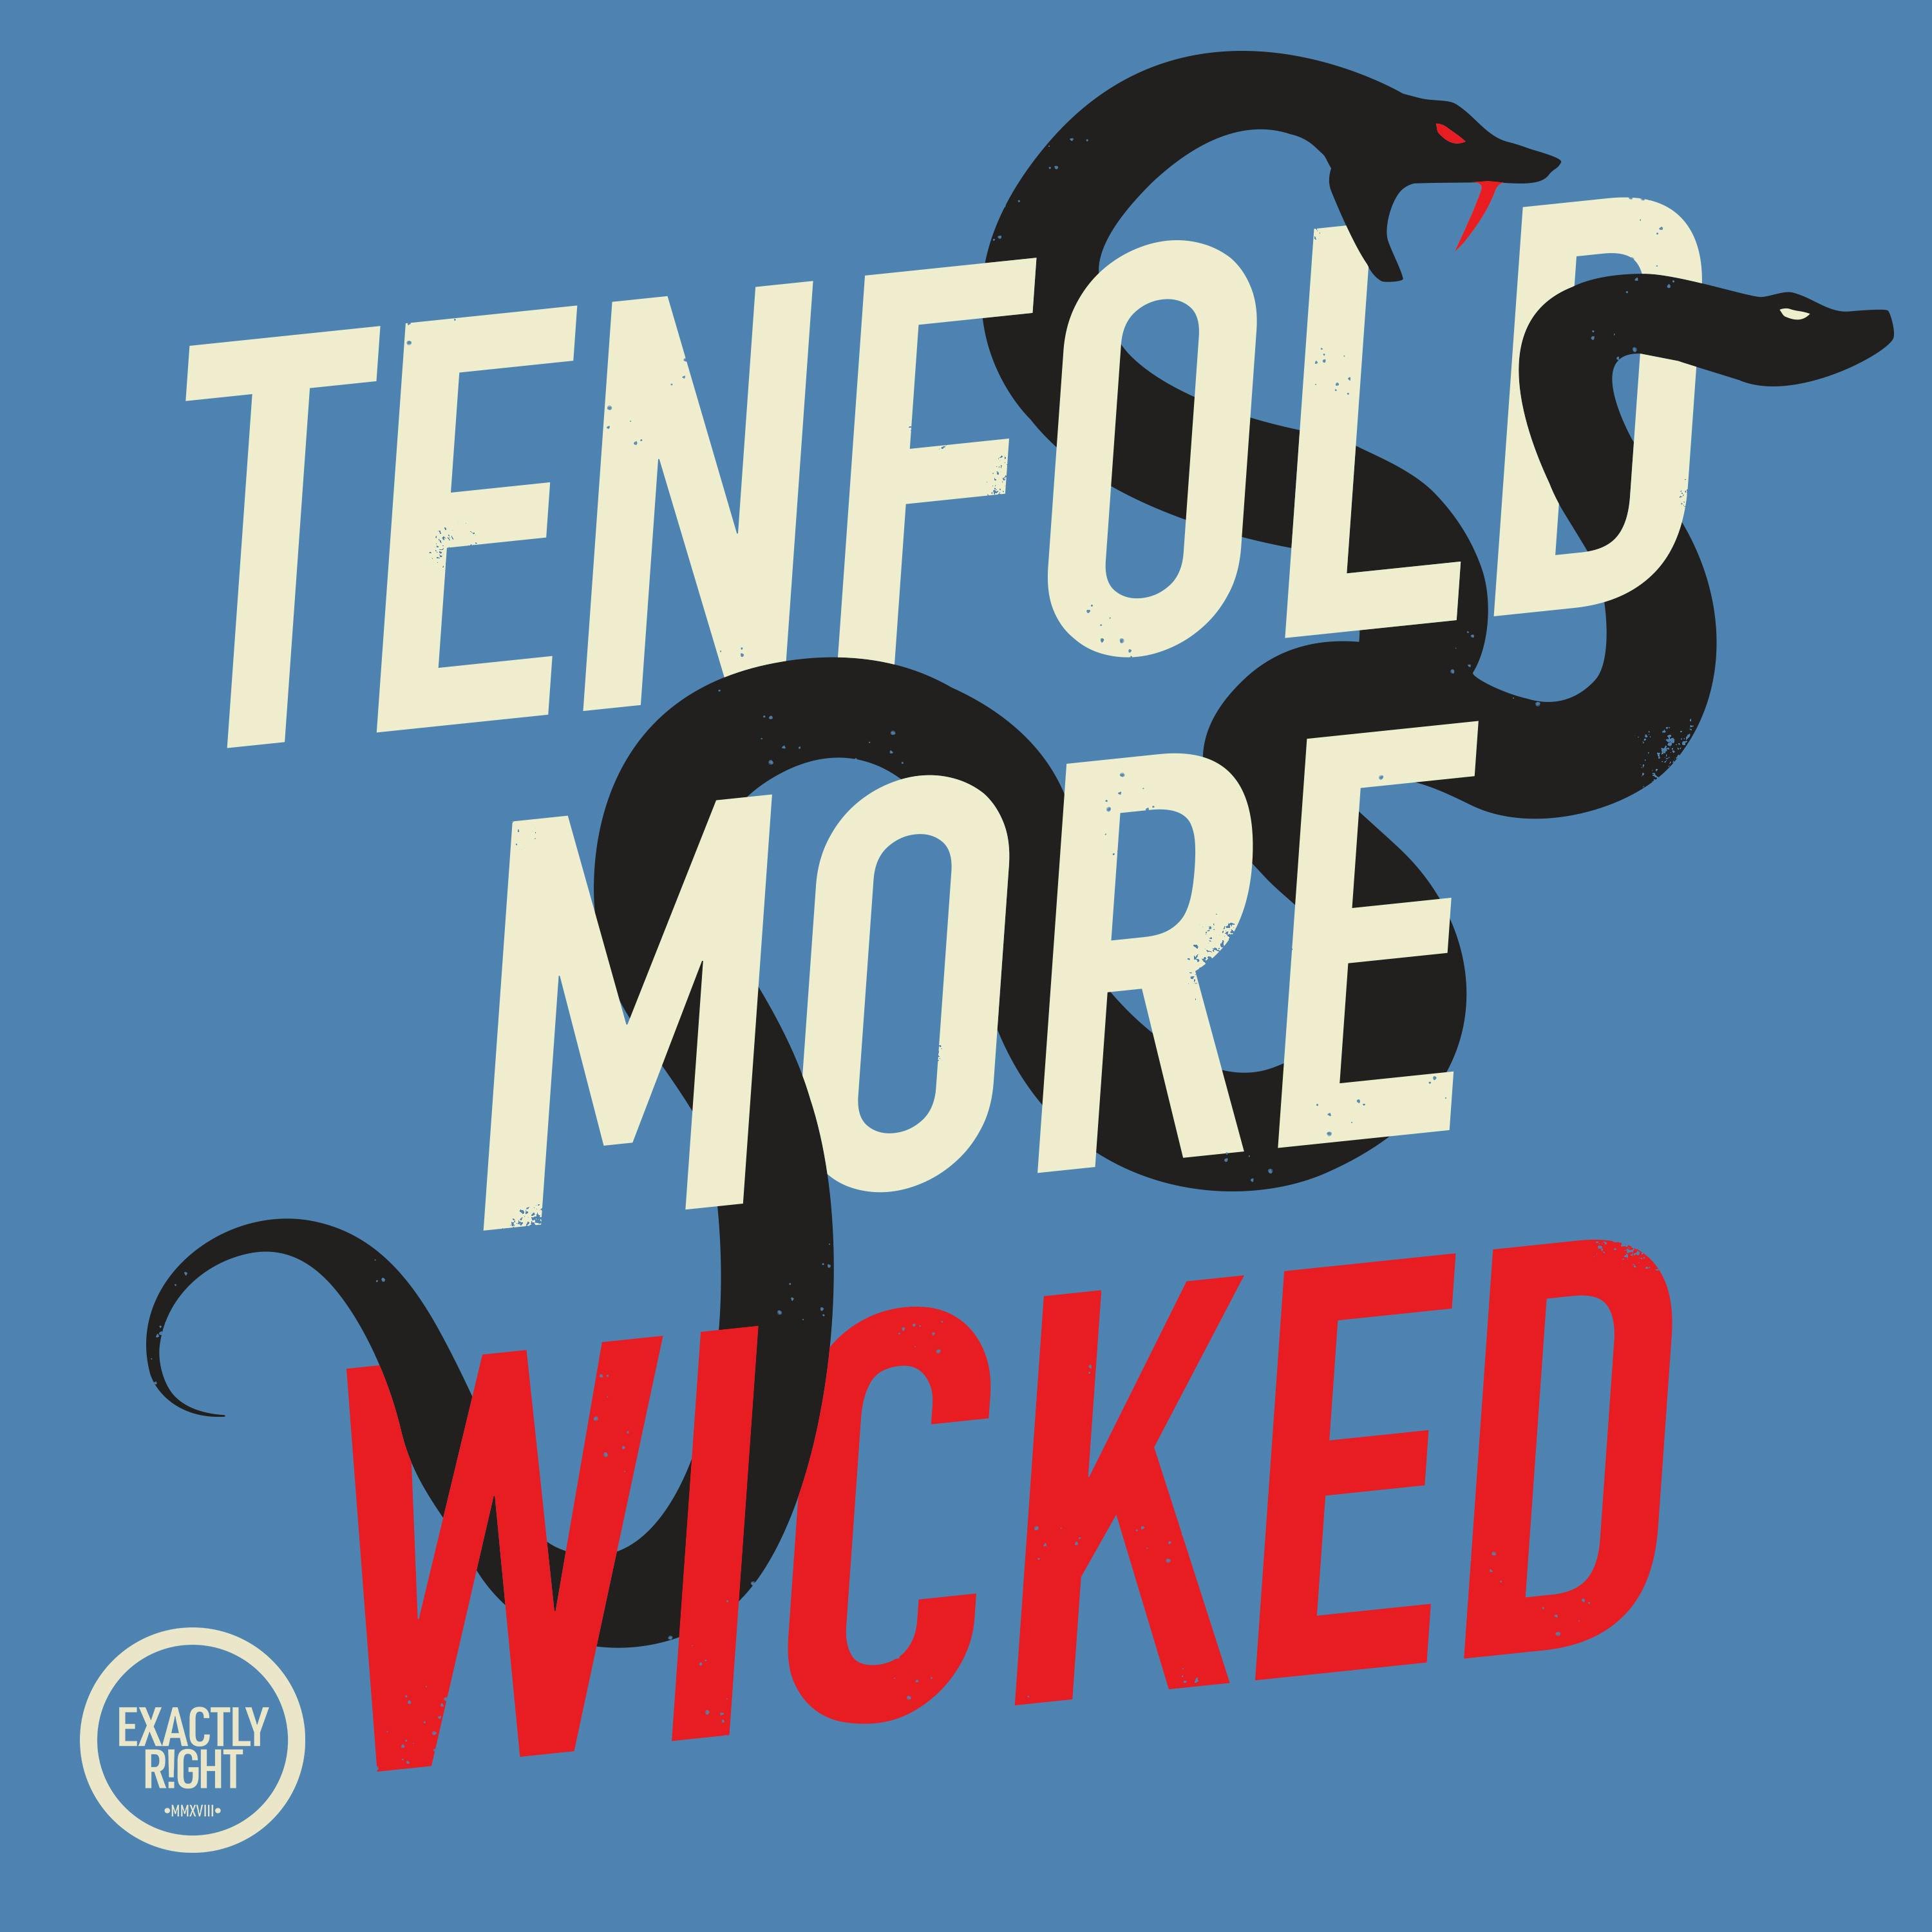 Tenfold More Wicked - Entitled: Treason